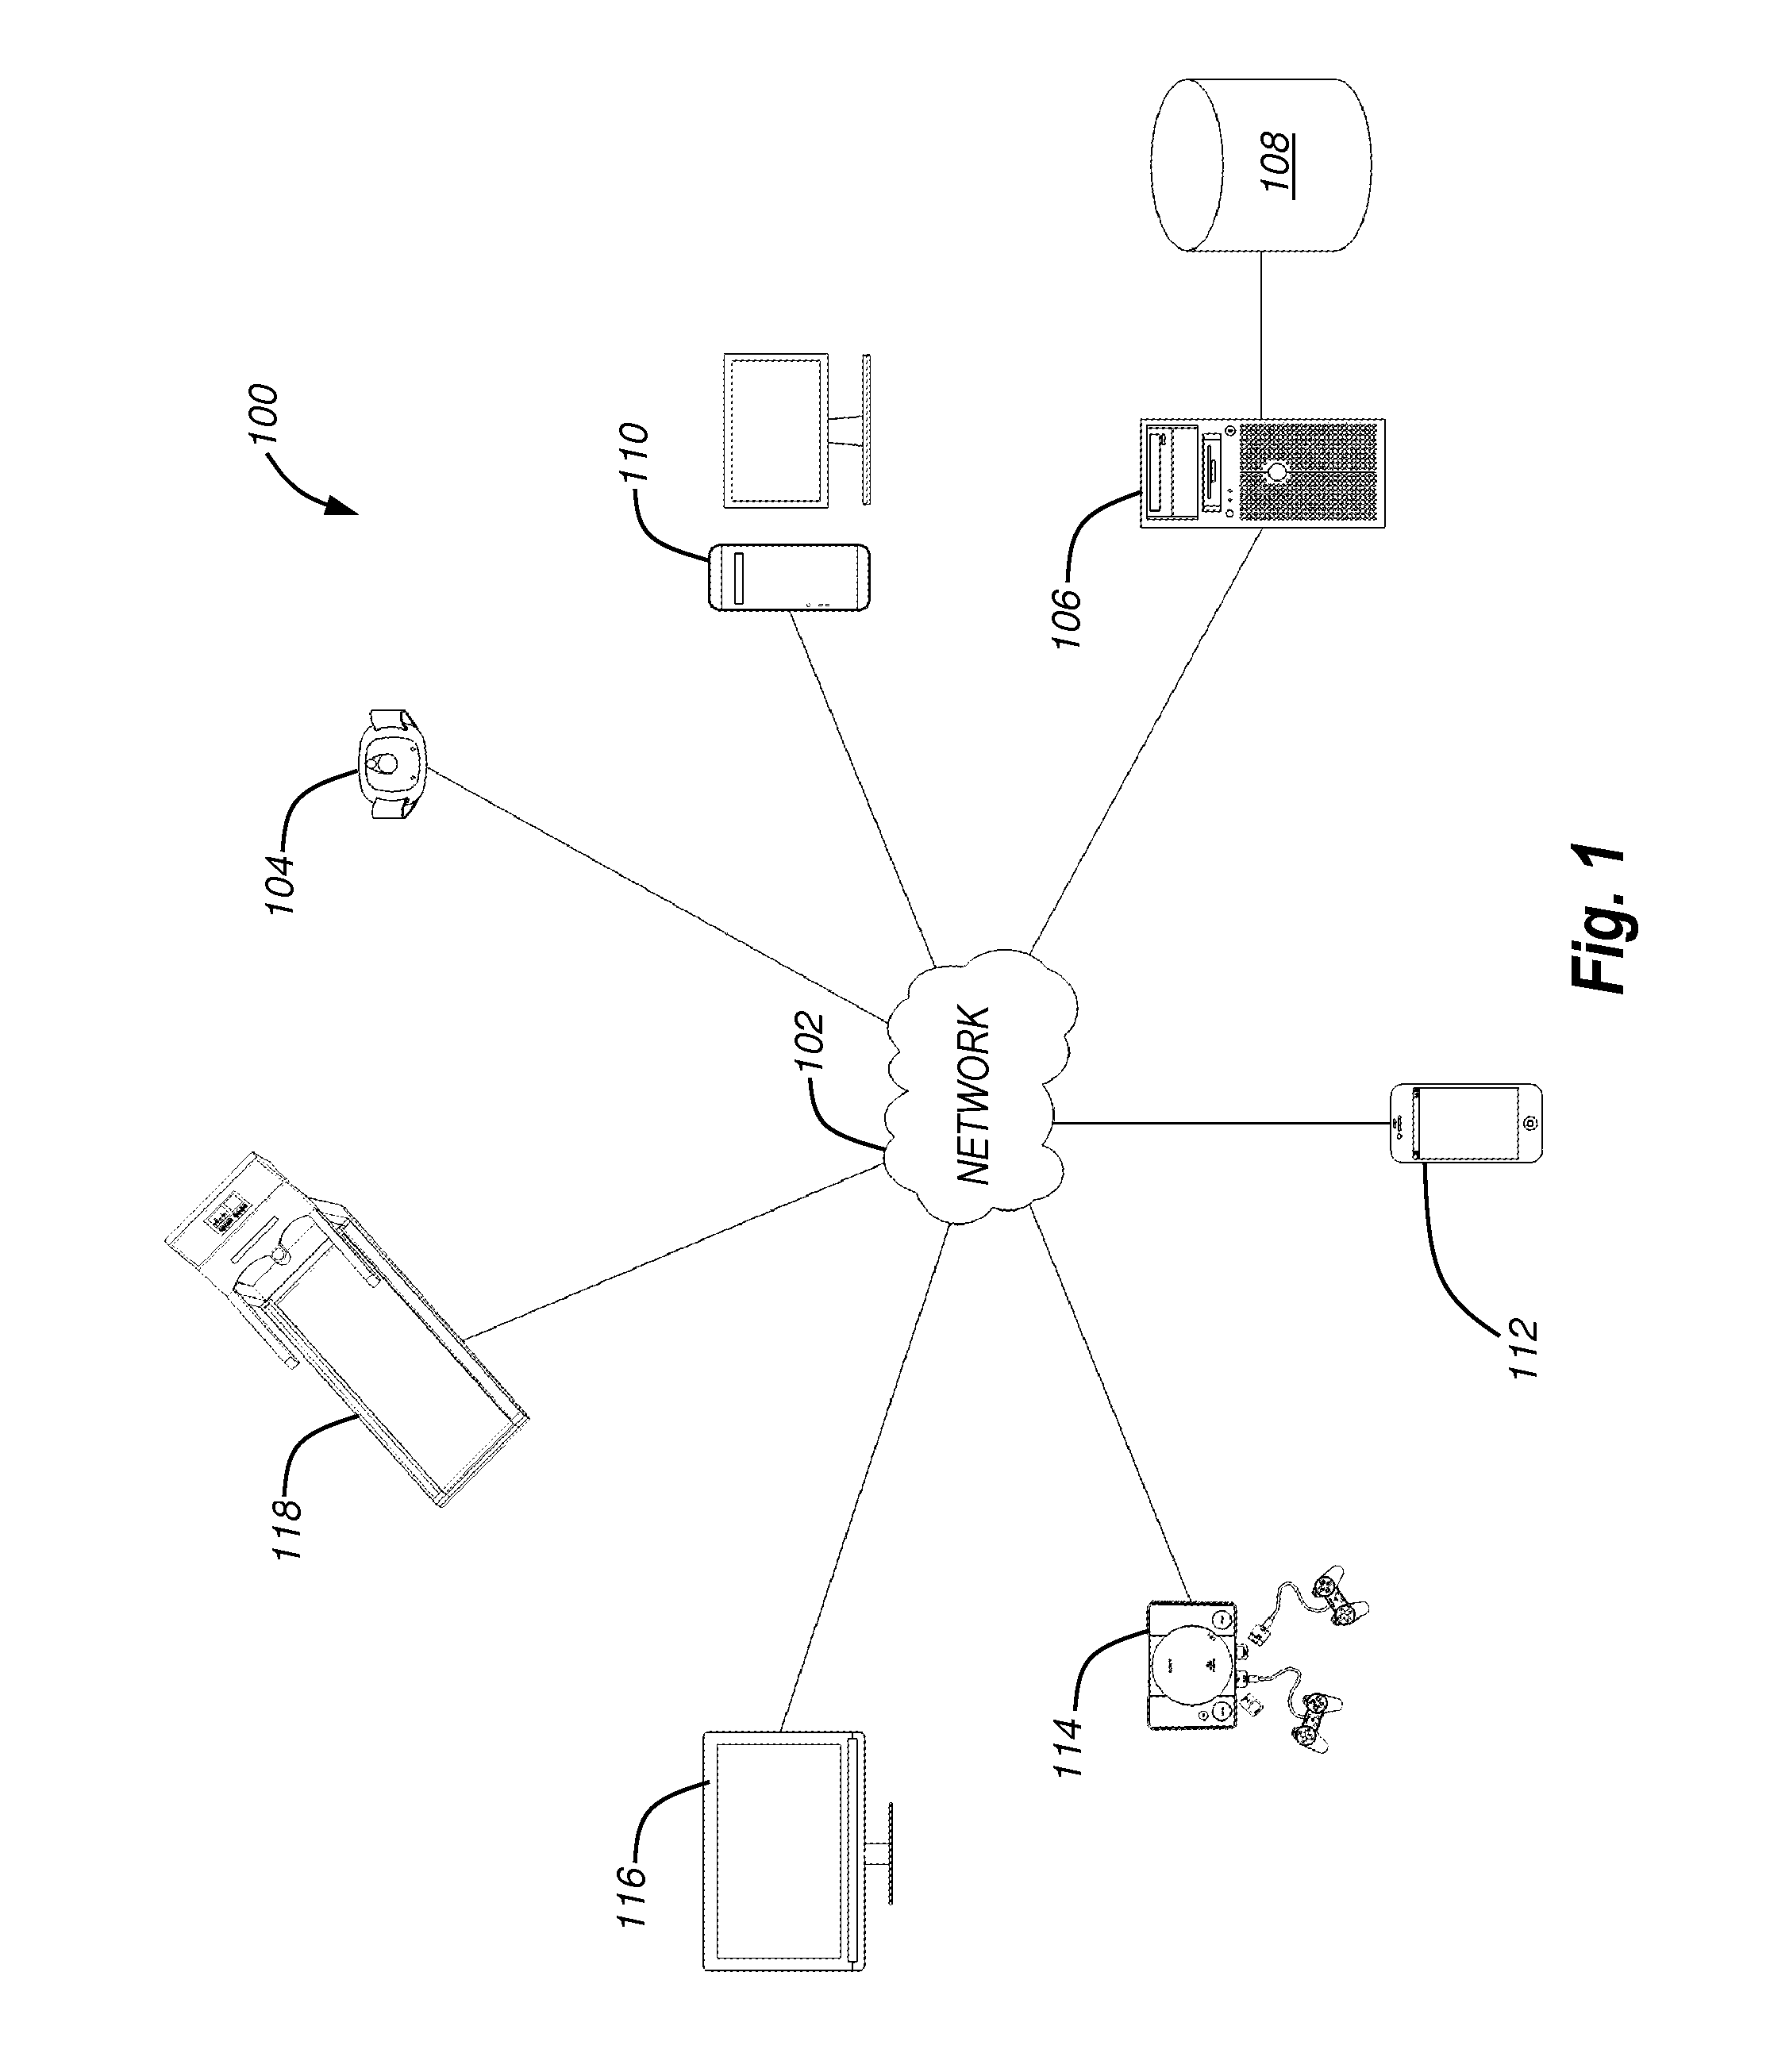 System and method for rewarding physical activity